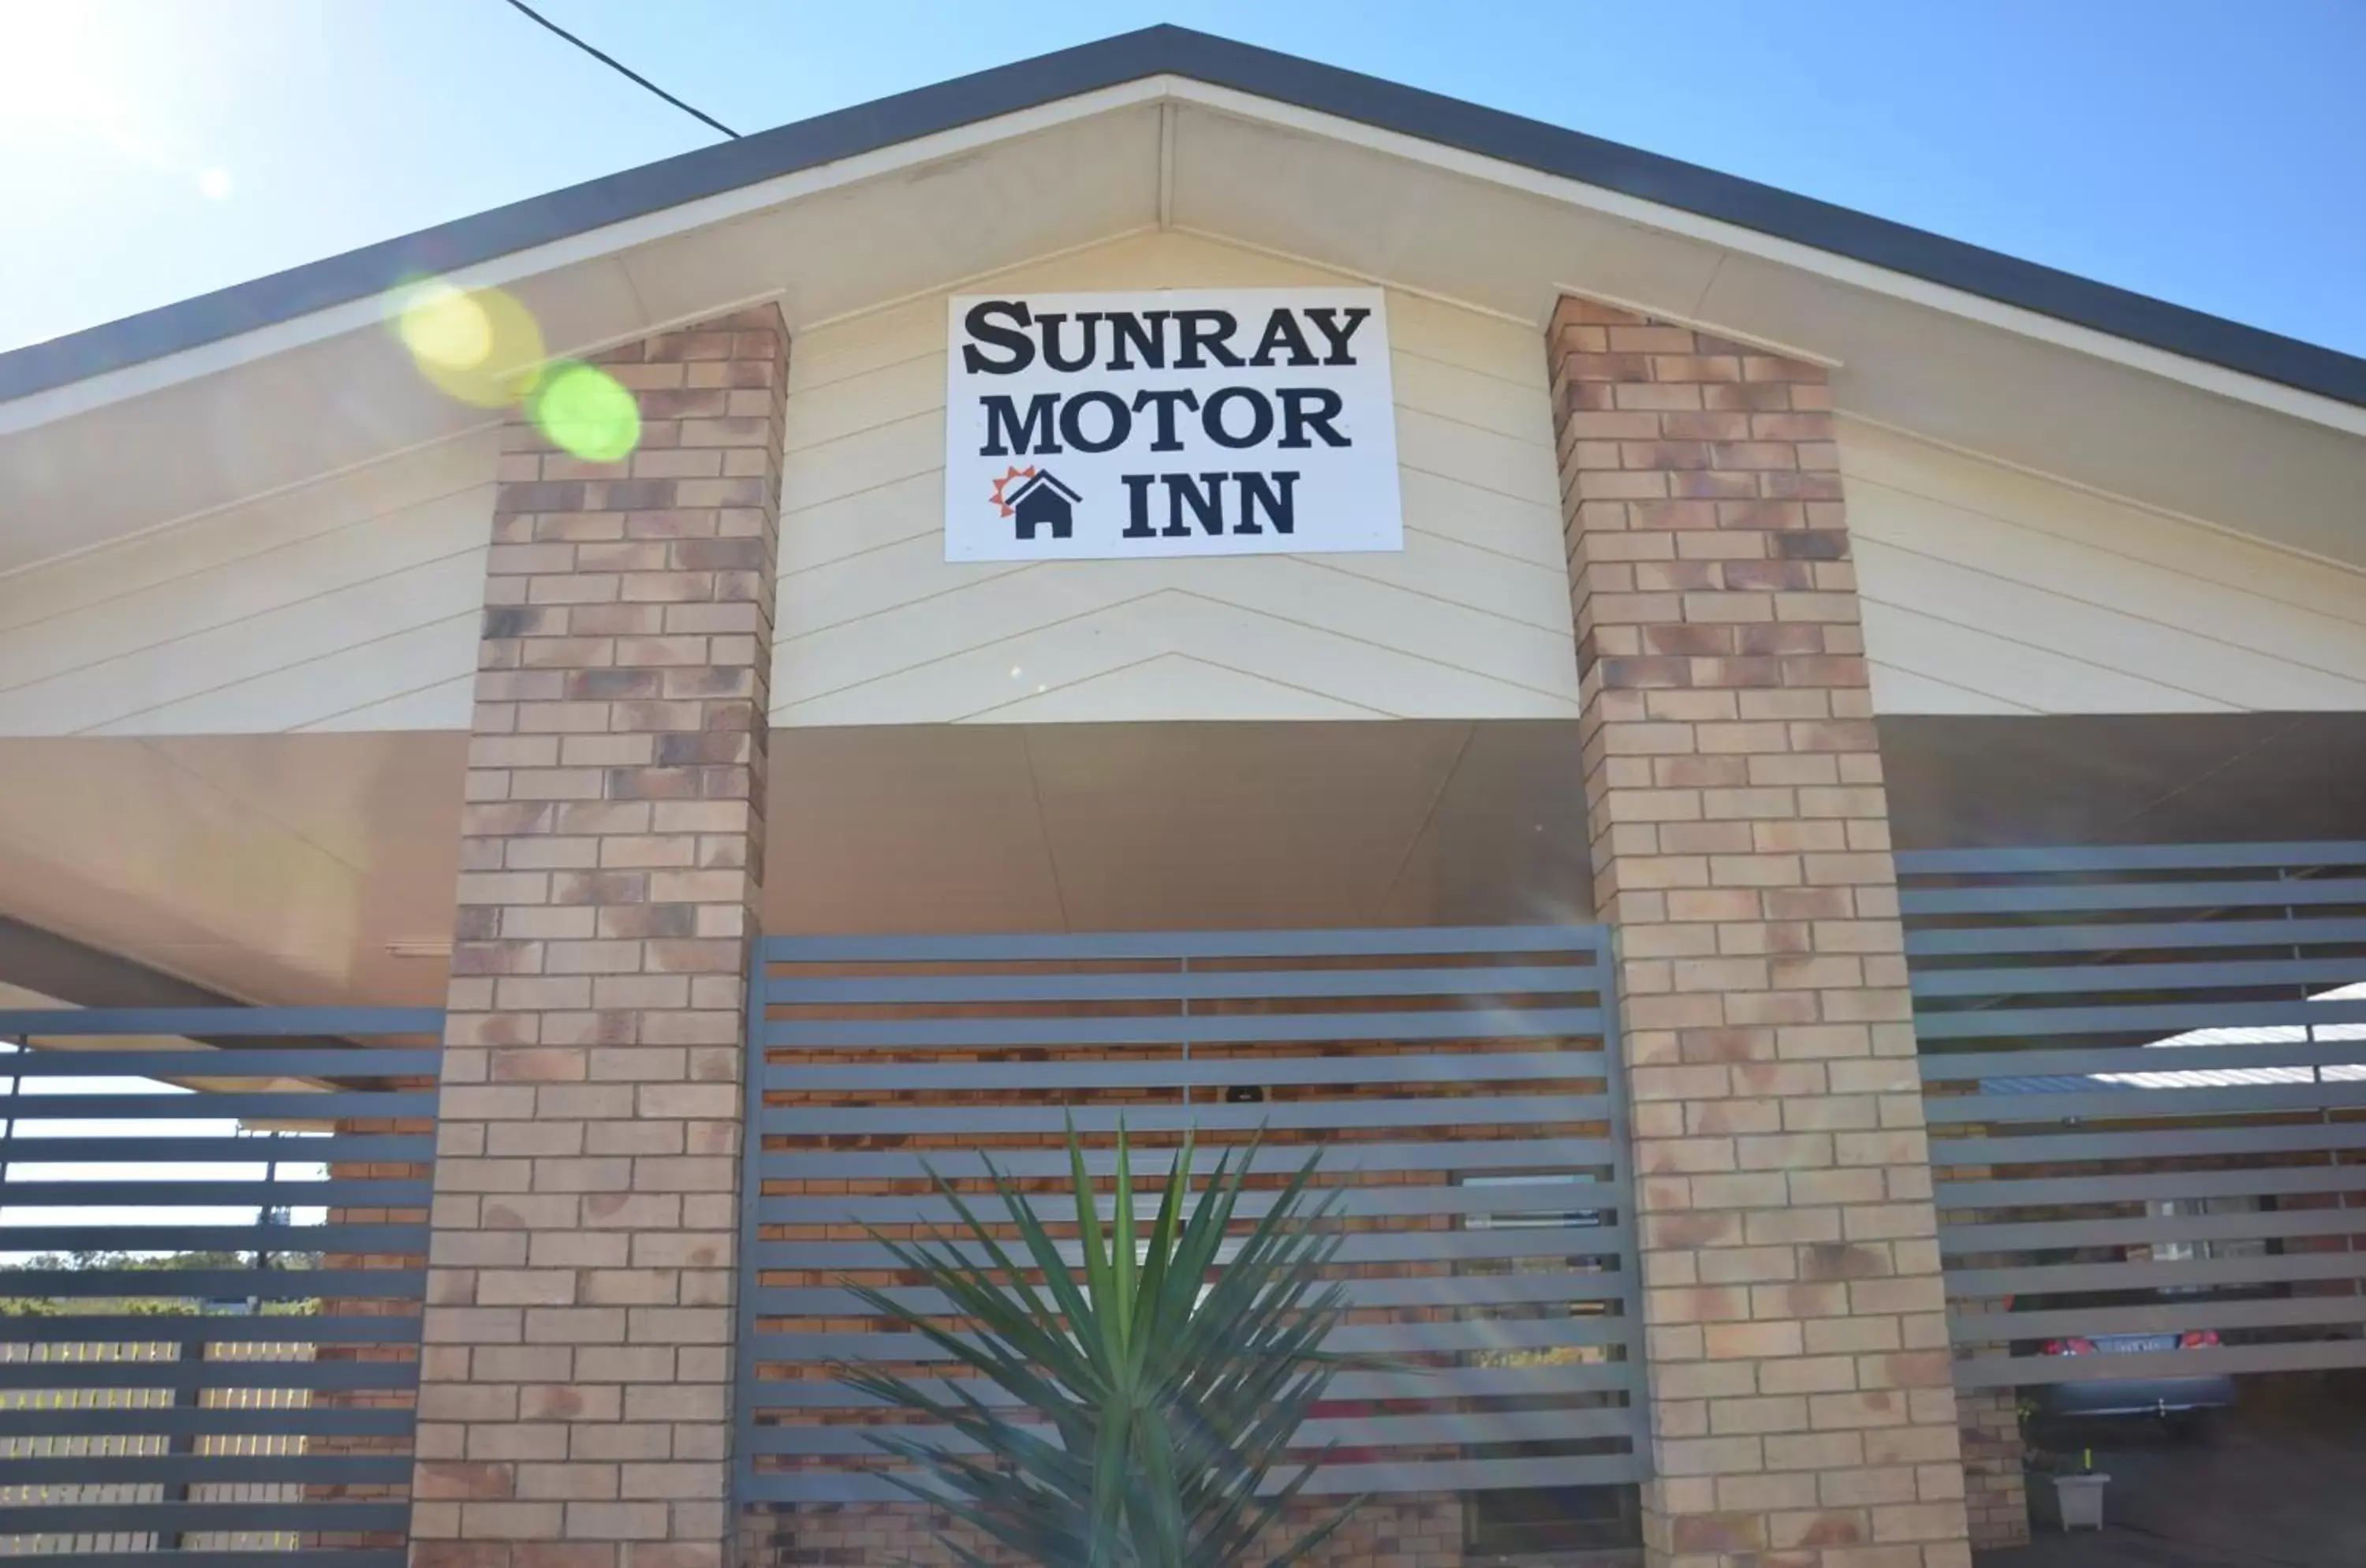 Property logo or sign, Property Building in Sunray Motor Inn